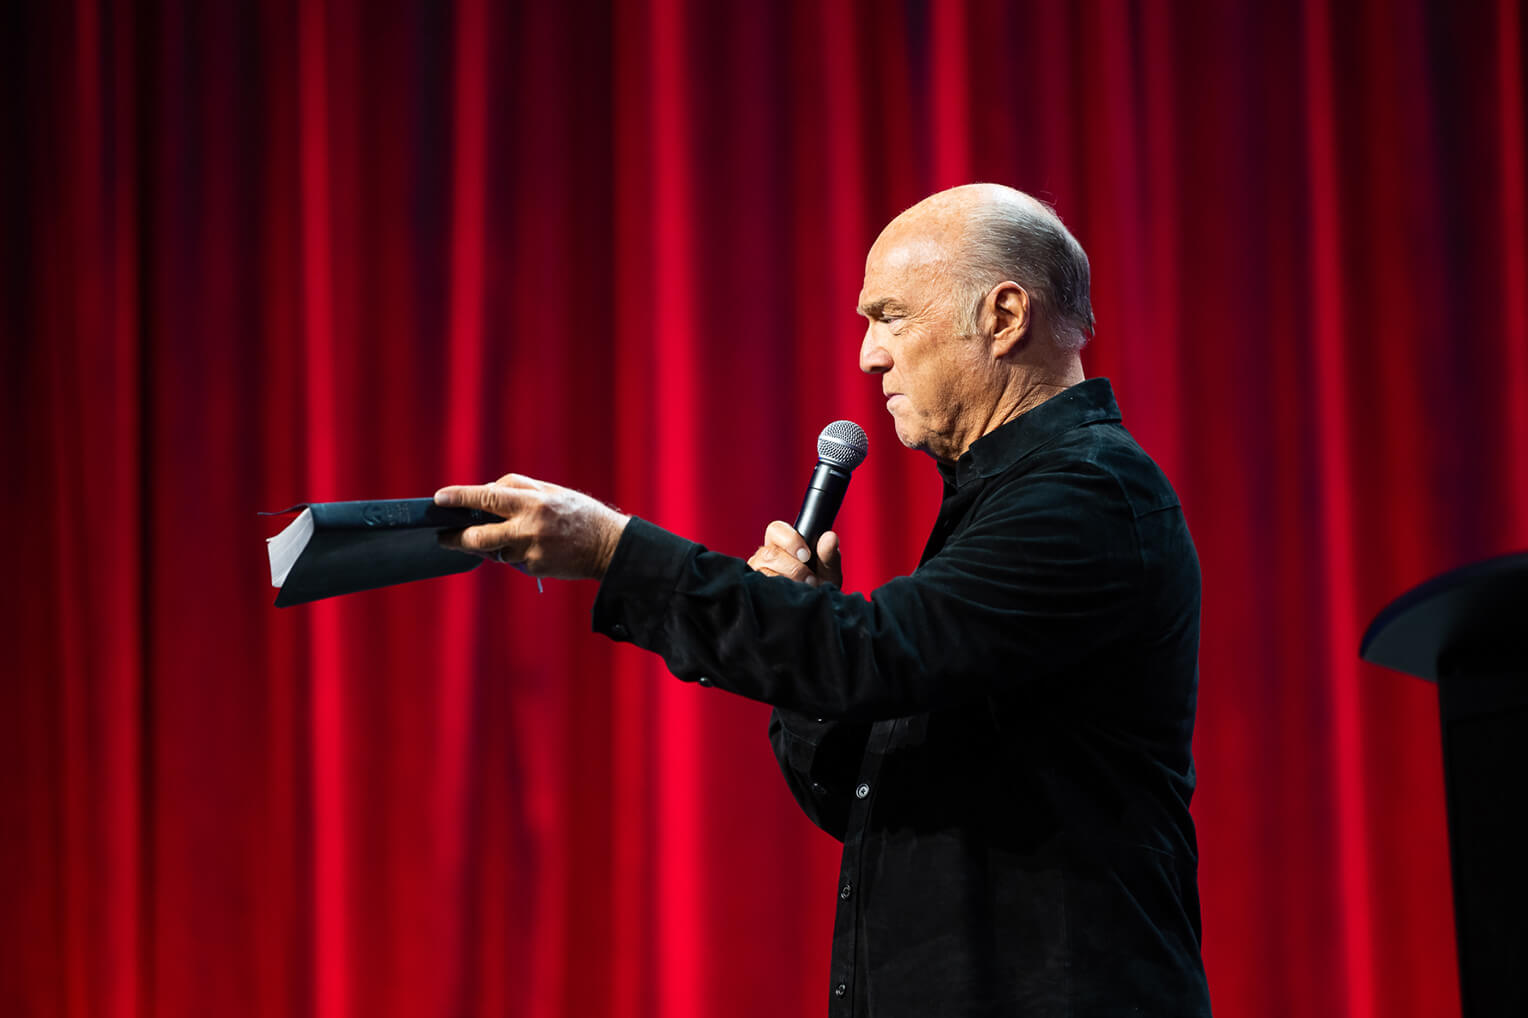 Pastor Greg Laurie used his own experience with his marriage to encourage the military couples.